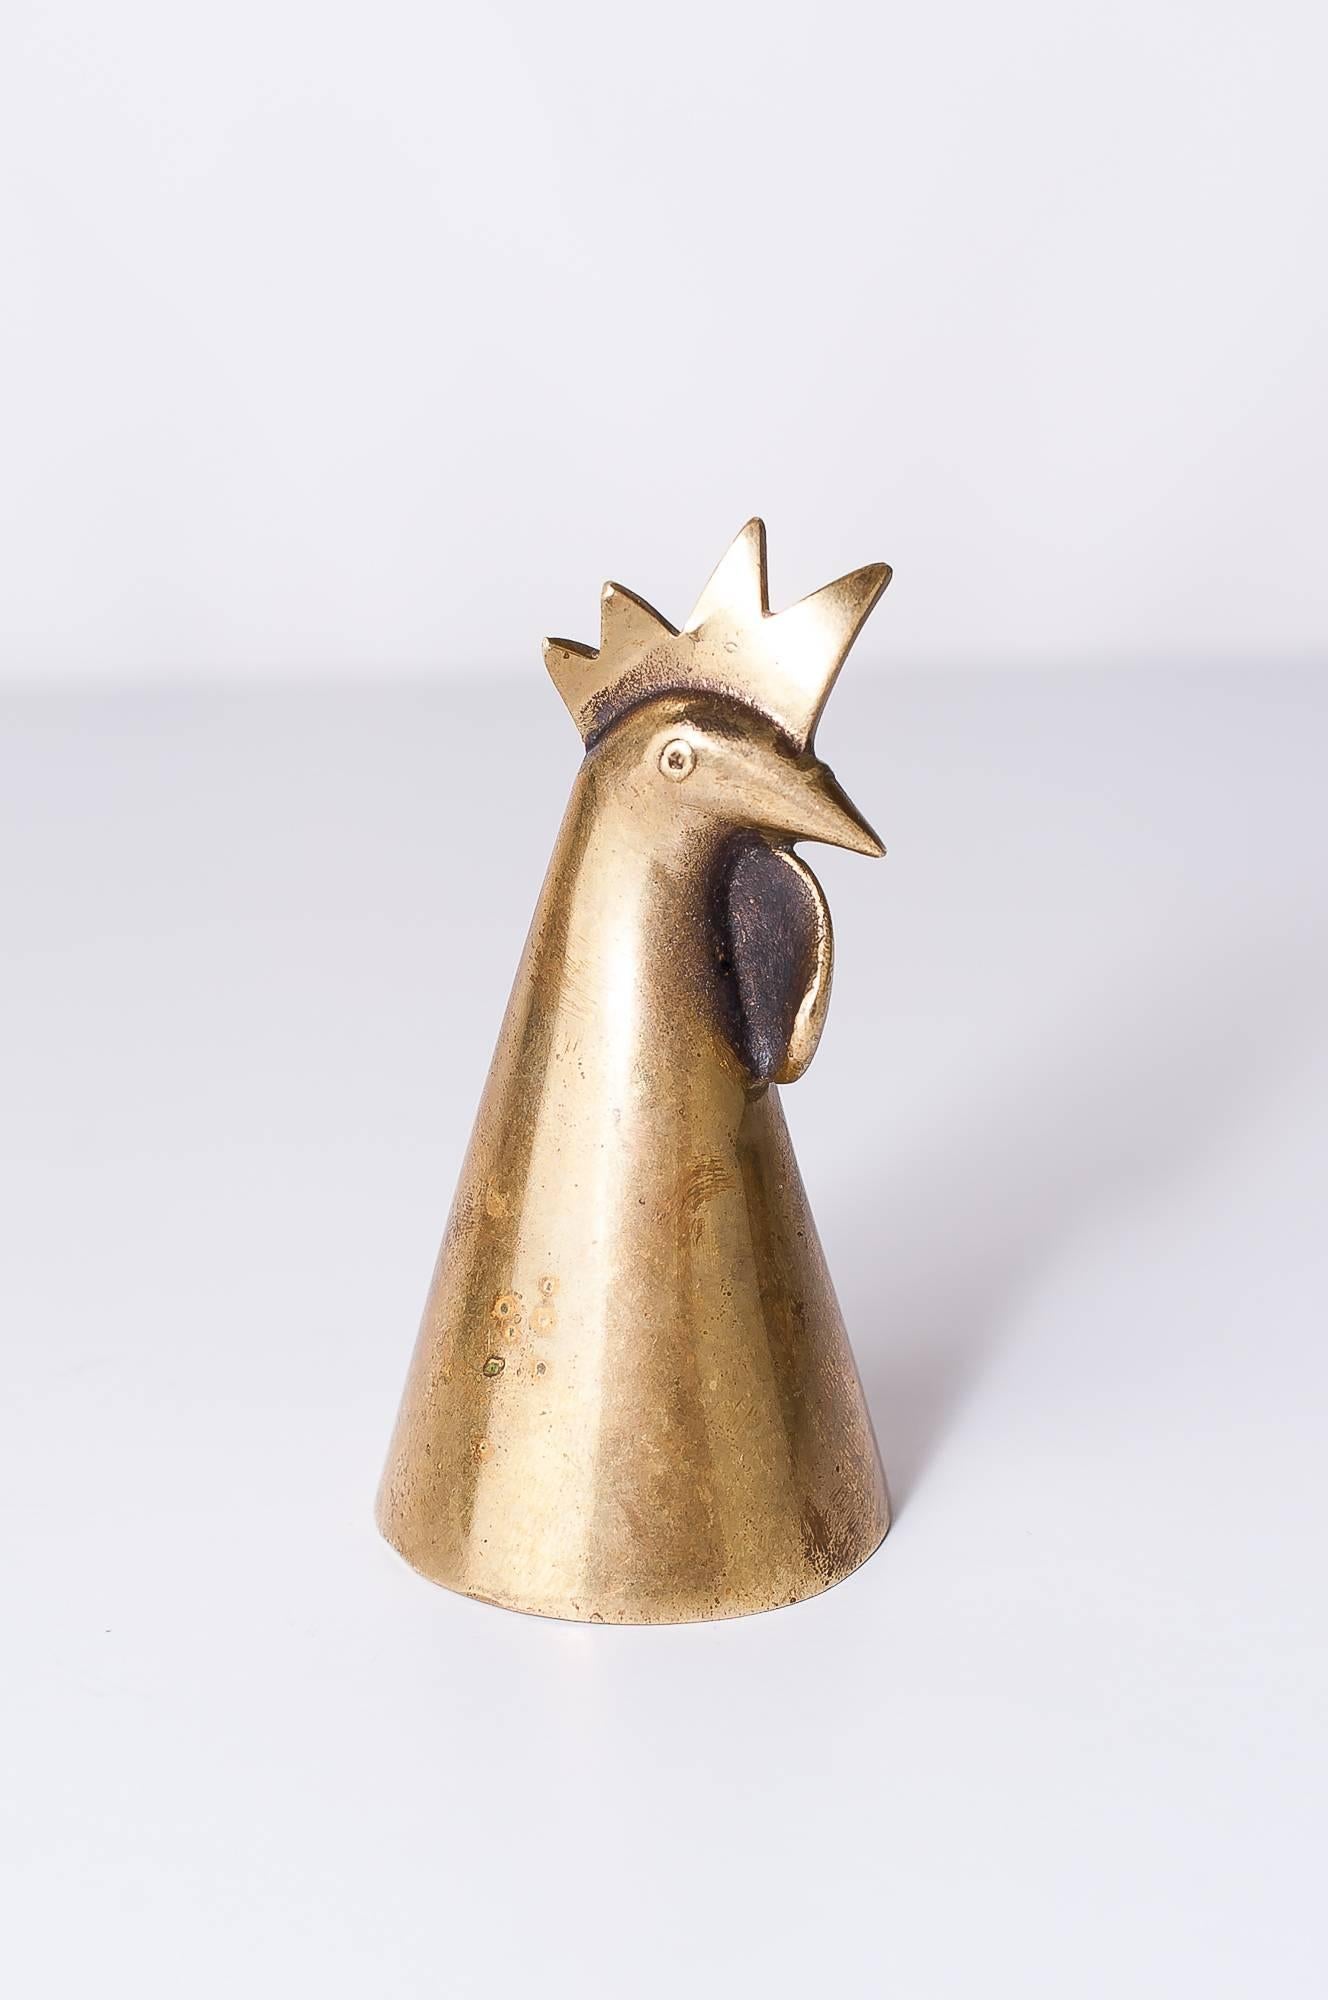 Auböck rooster bottle stopper, circa 1950s
This beautiful bottle stopper is in excellent original condition
Marked on the bottom.